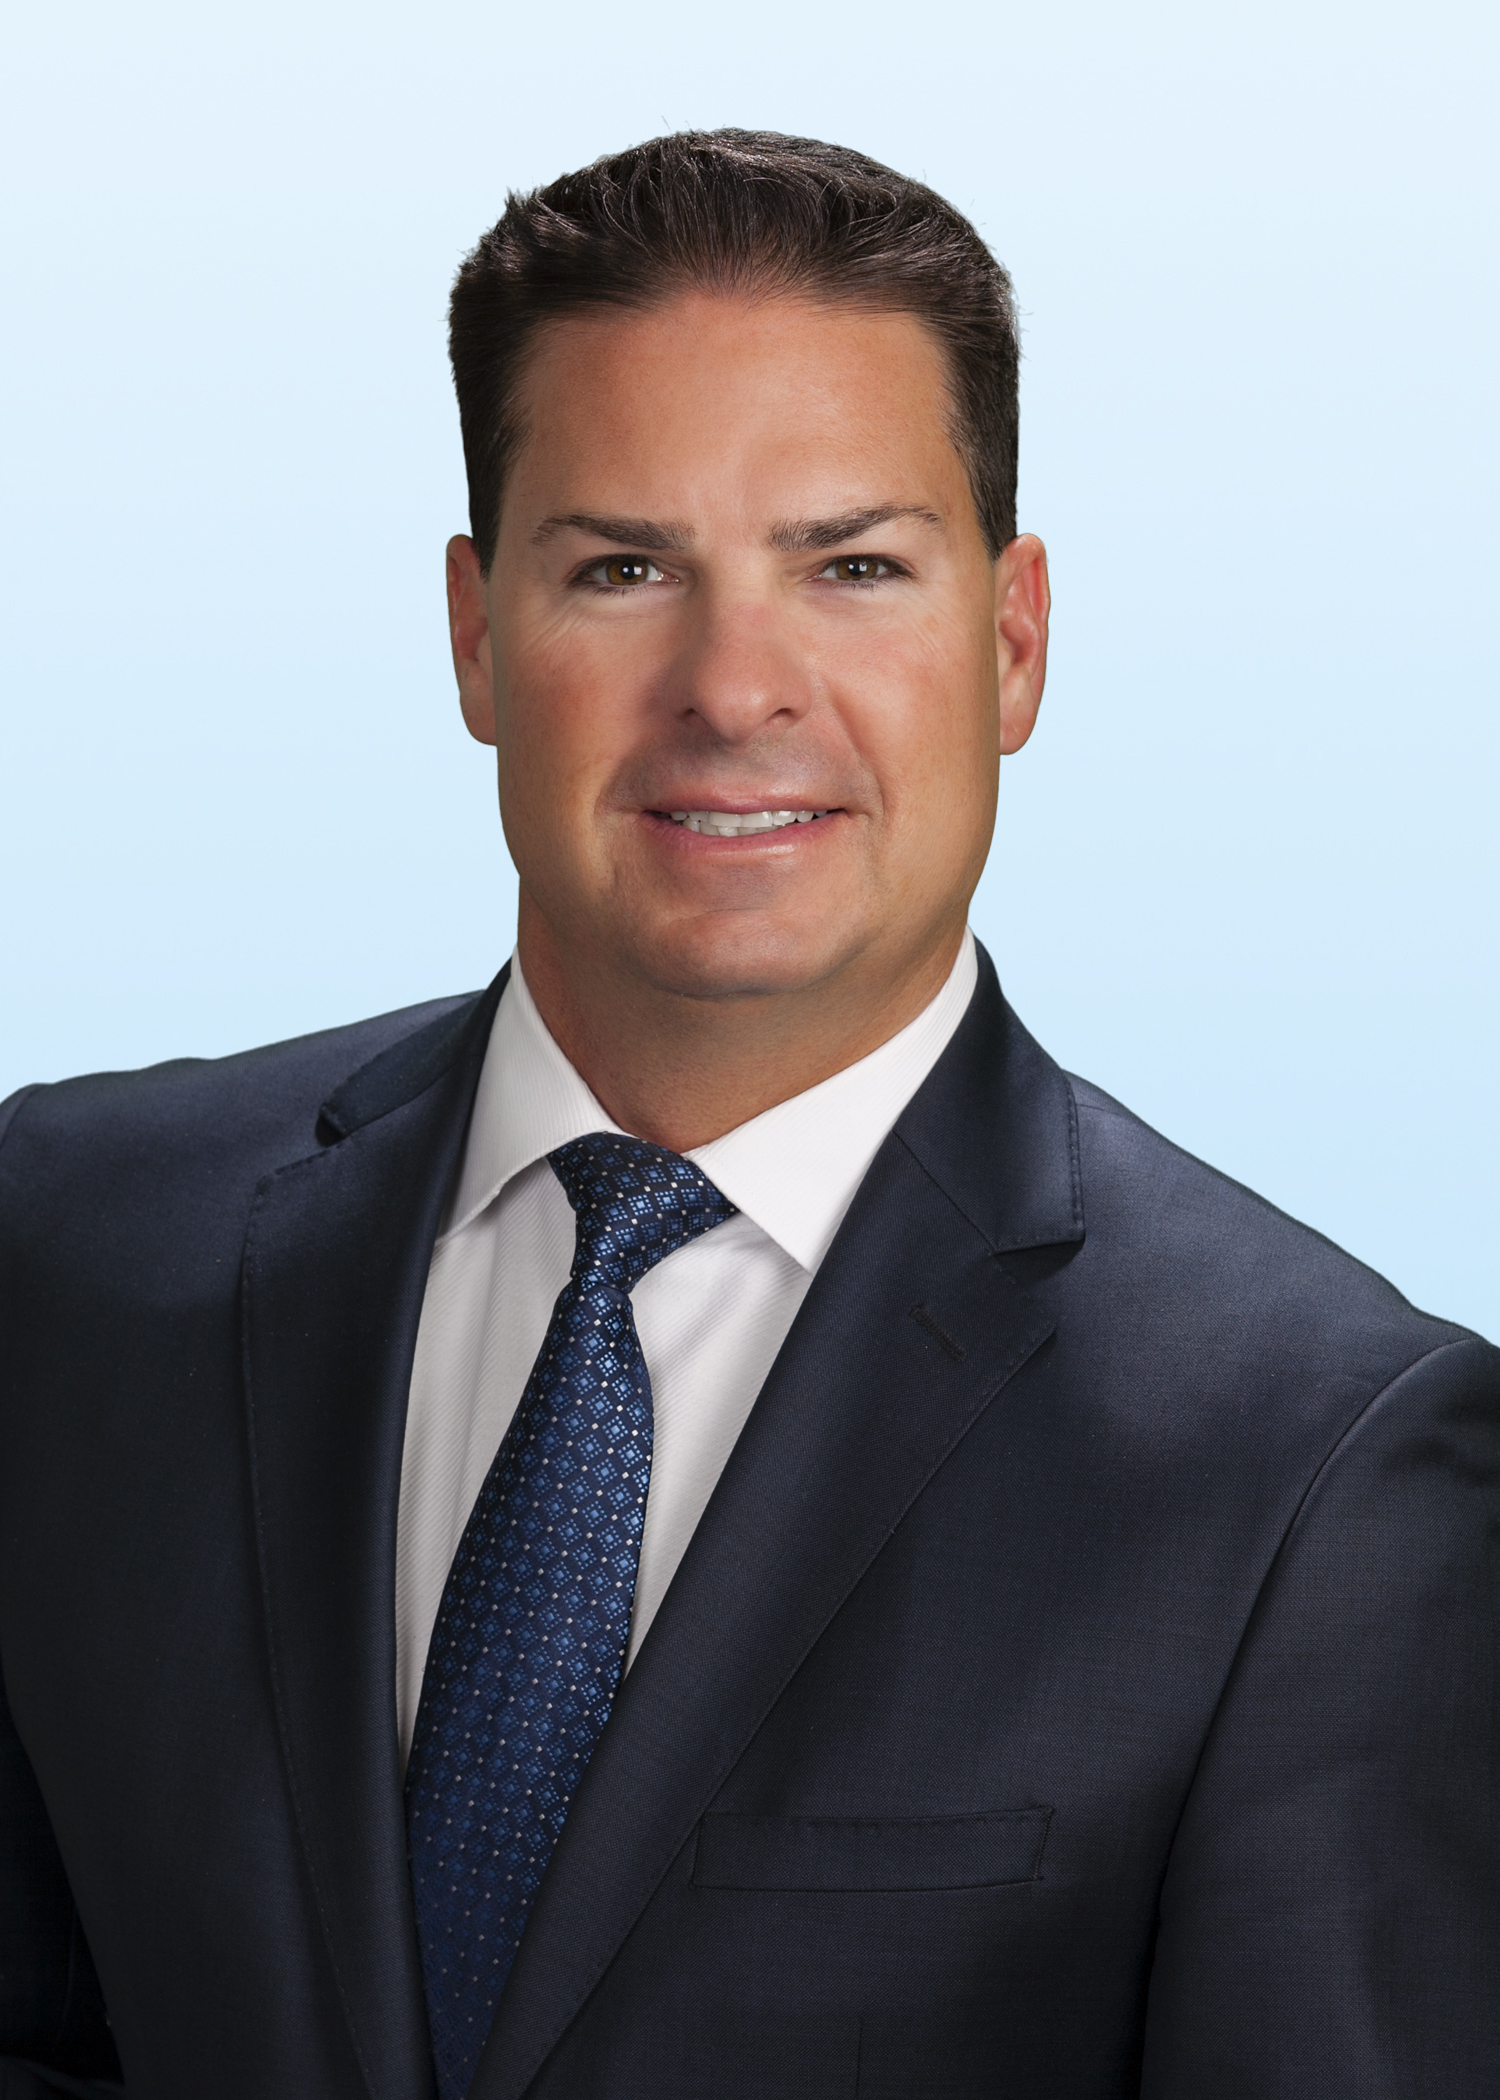 Mike Mixer, executive managing director of Colliers International – Las Vegas, announced the company has hired Chris Zunis as associate.